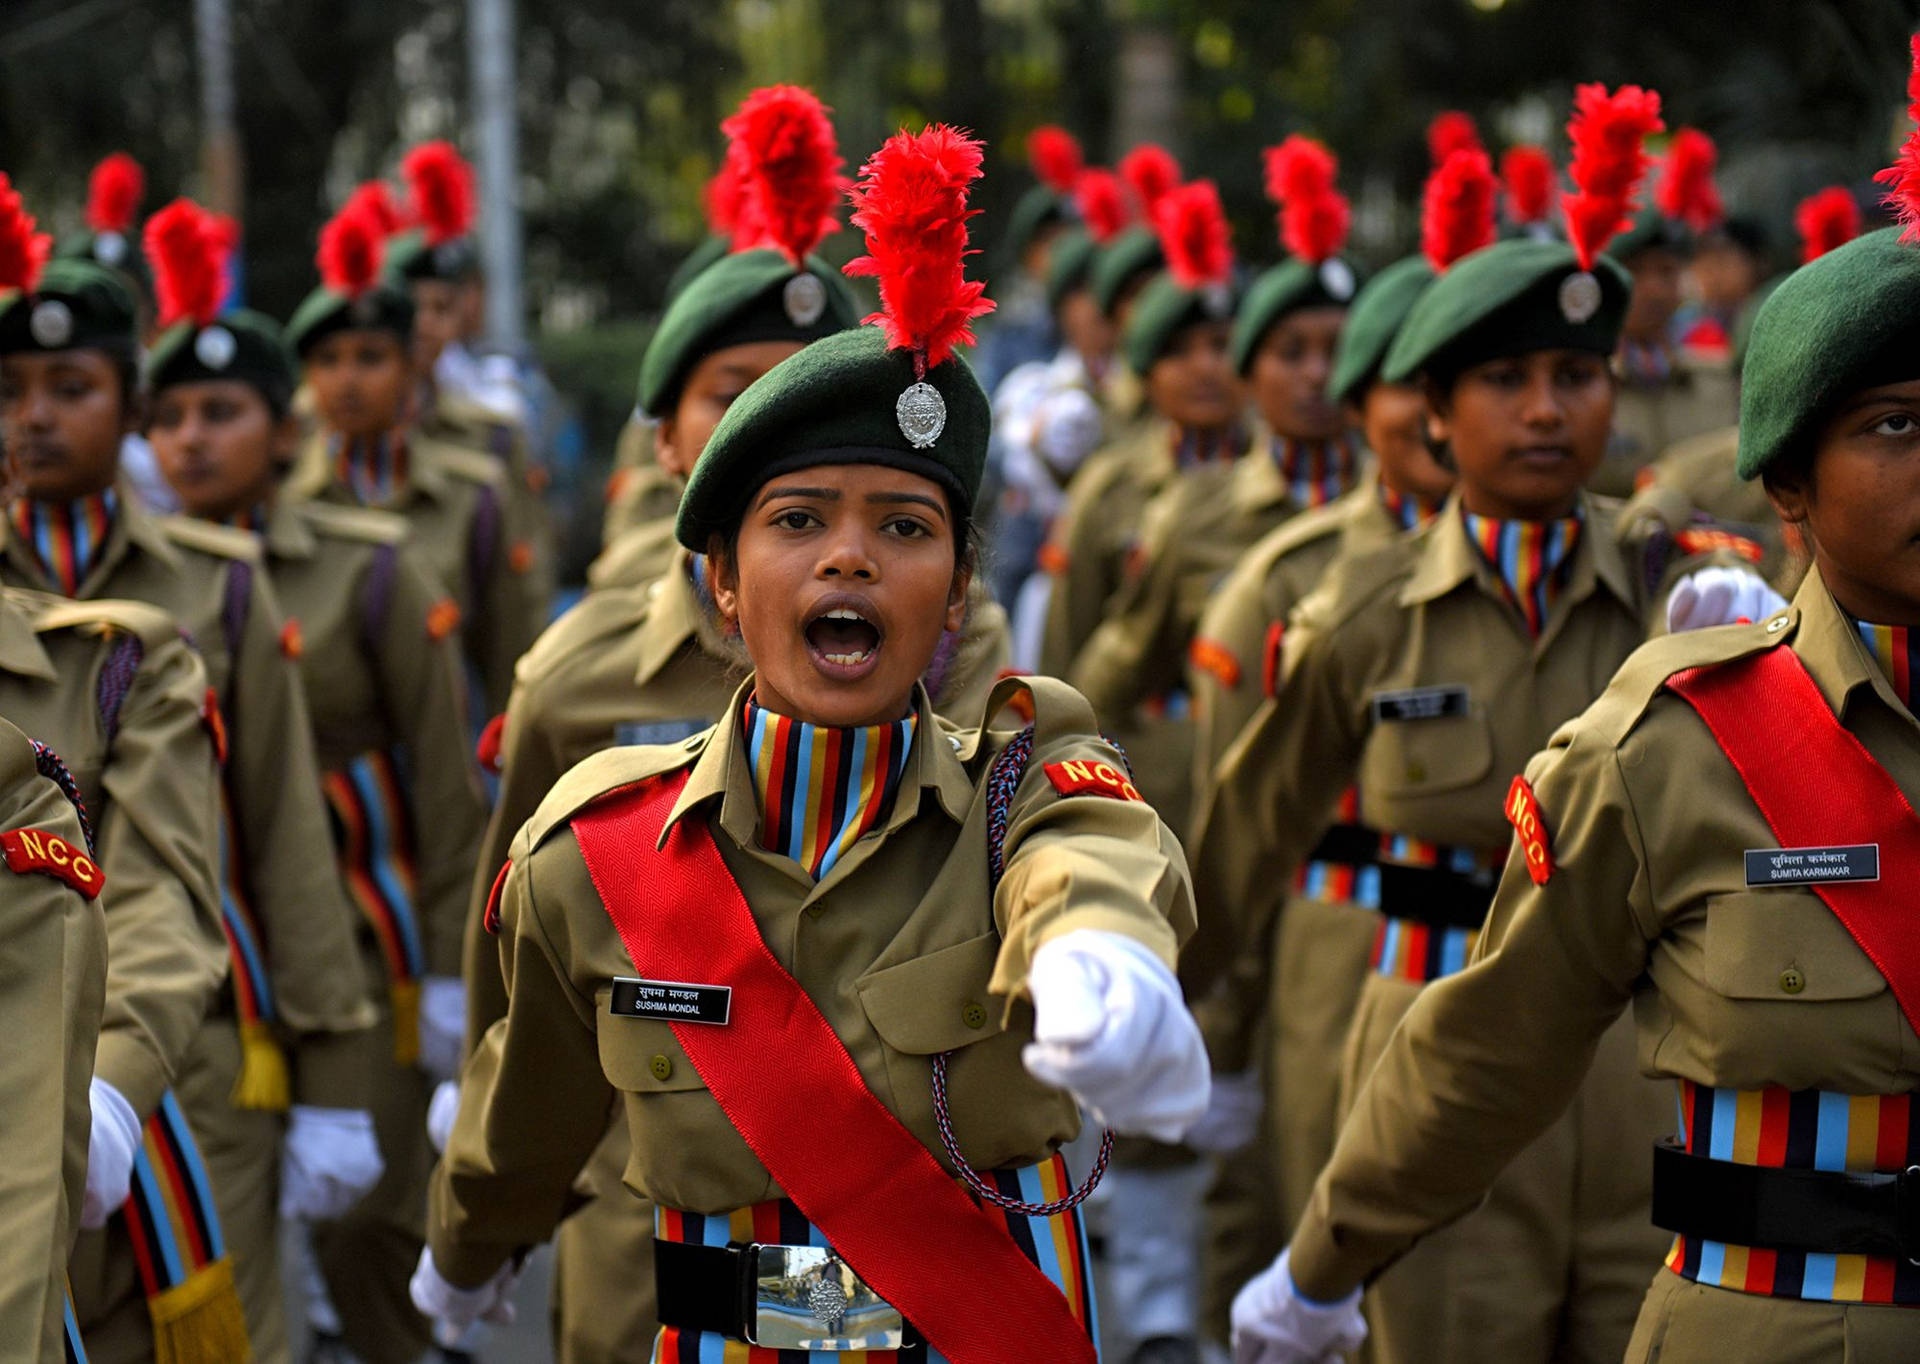 Indian Army Girl - Ncc Training Session